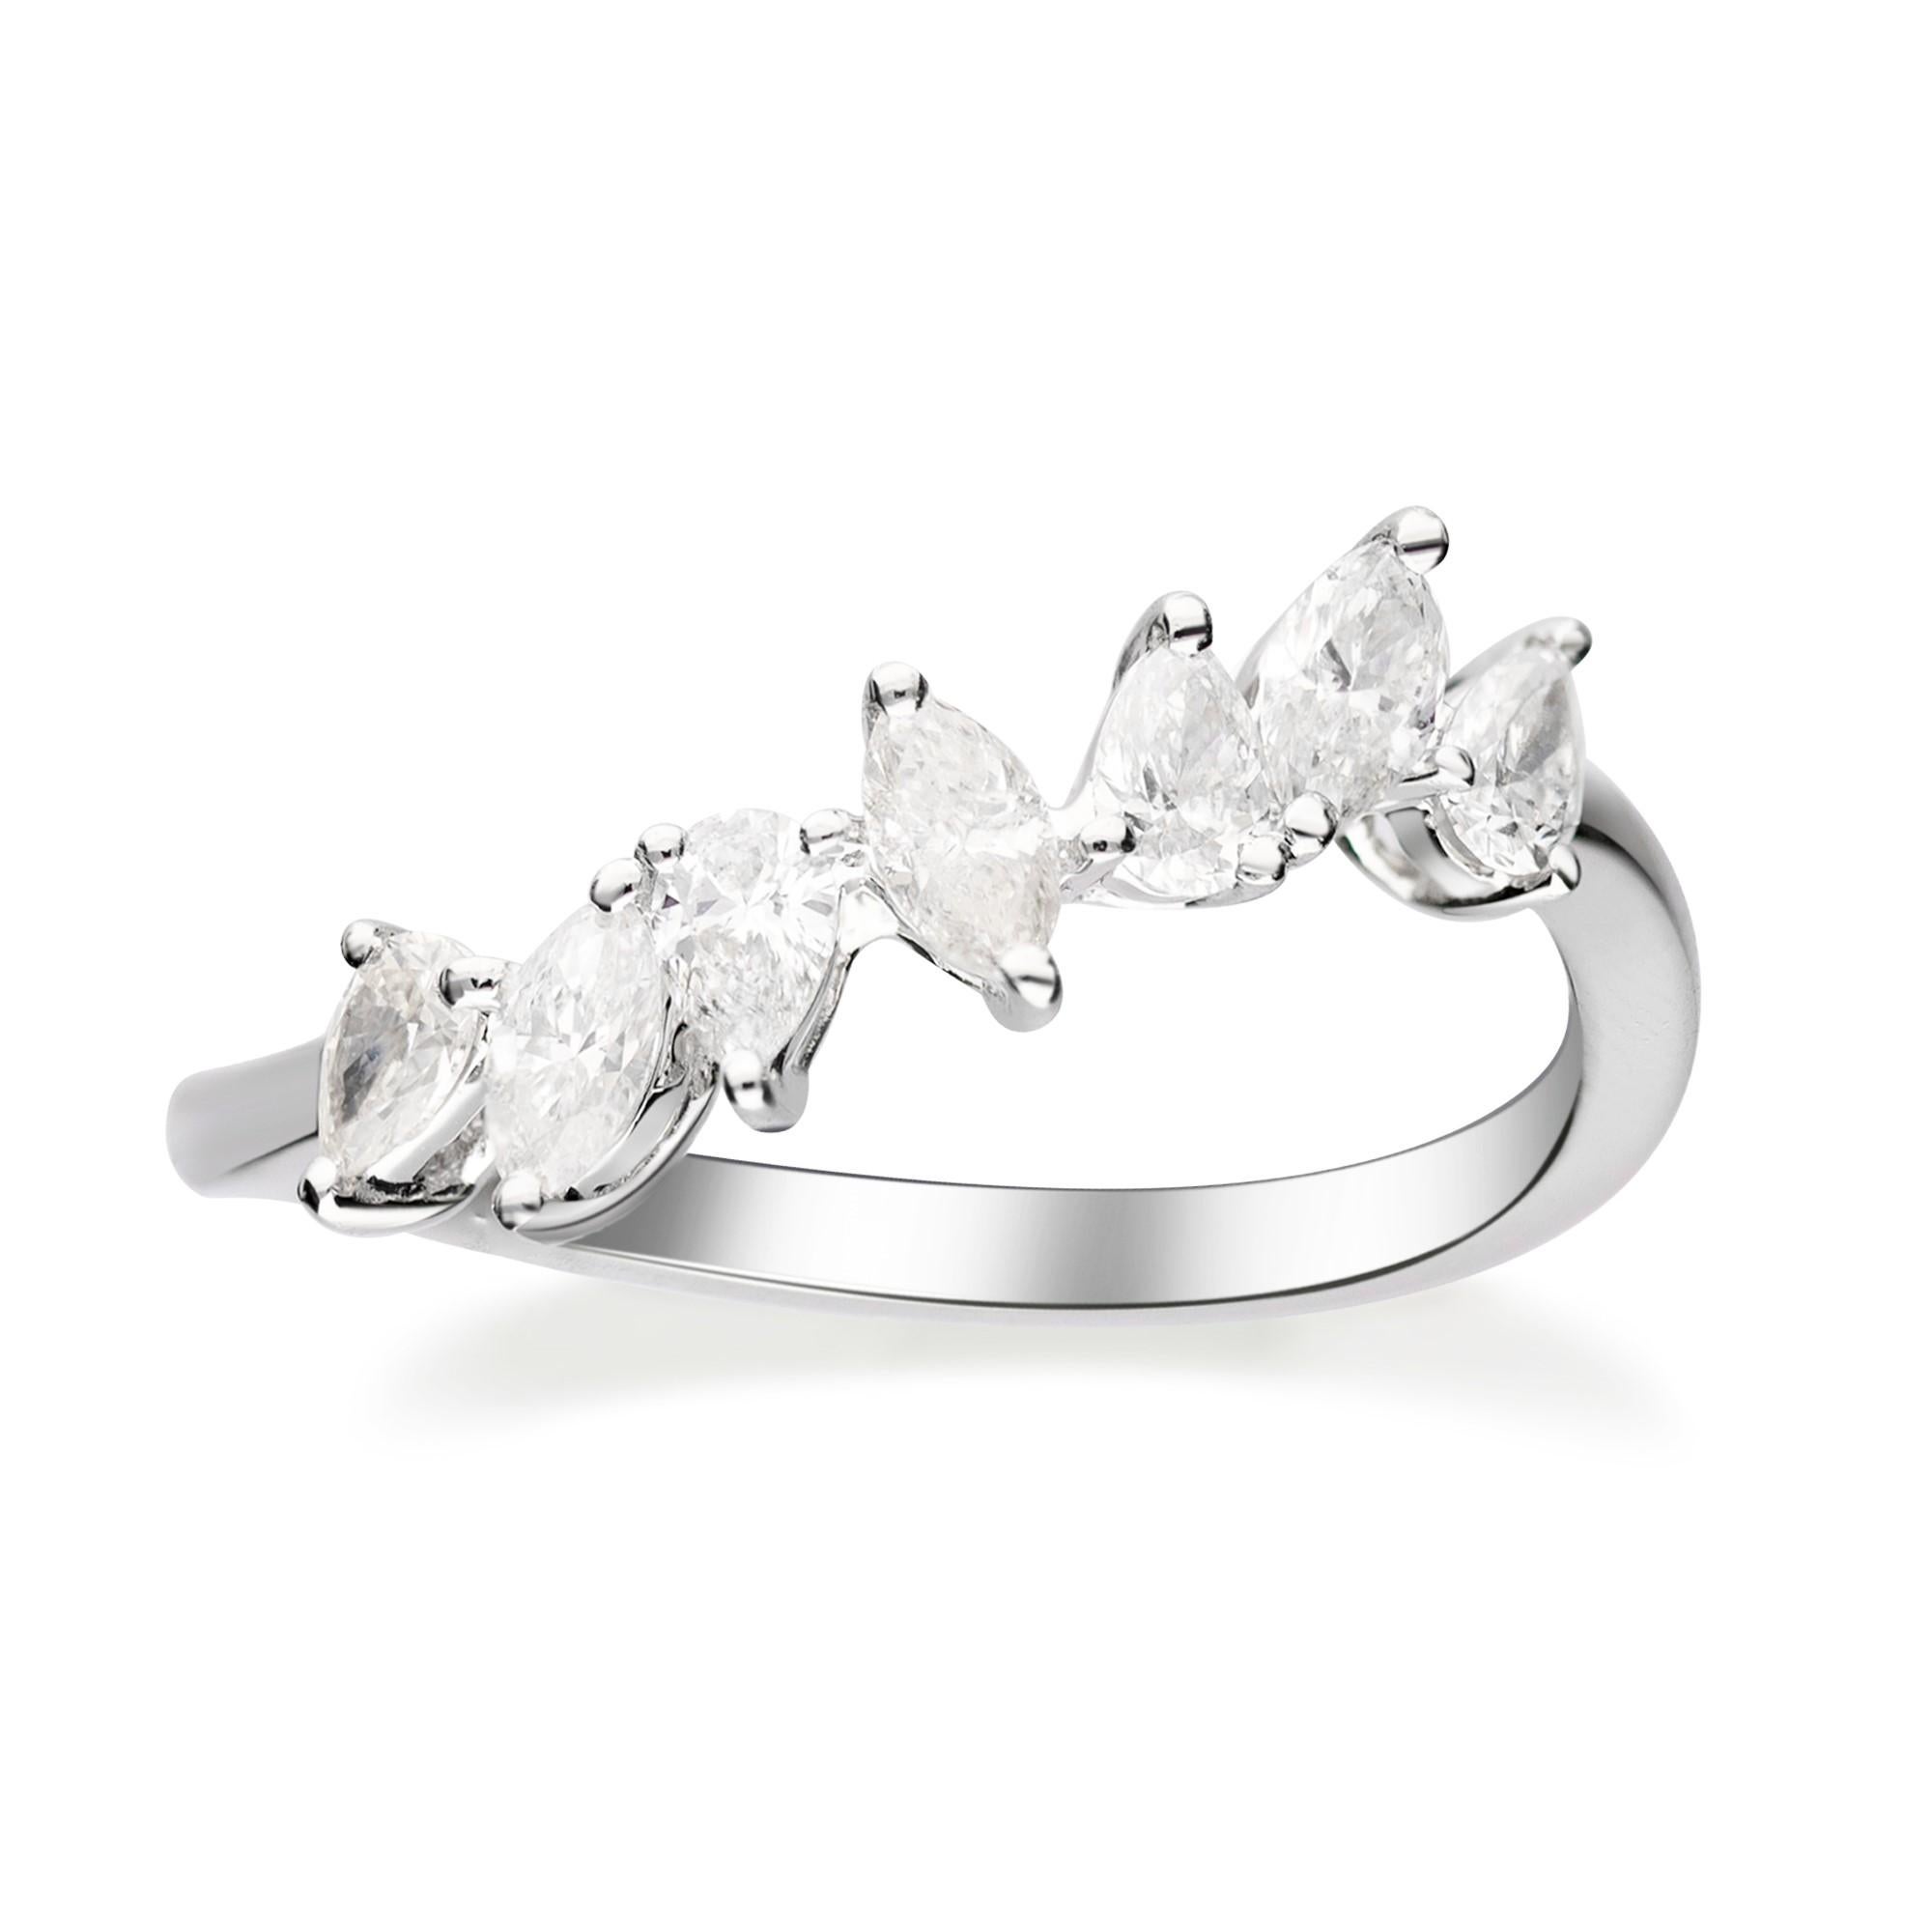 This beautiful ring is crafted in 18-karat White gold and features a 3 Marquise Diamond 0.33 Carat & 4 Pear shaped Diamonds 0.35 carat in prong-settings in GH - VS quality. 
This ring comes in size 7 and can be resized to 6 & 8. It is a perfect gift